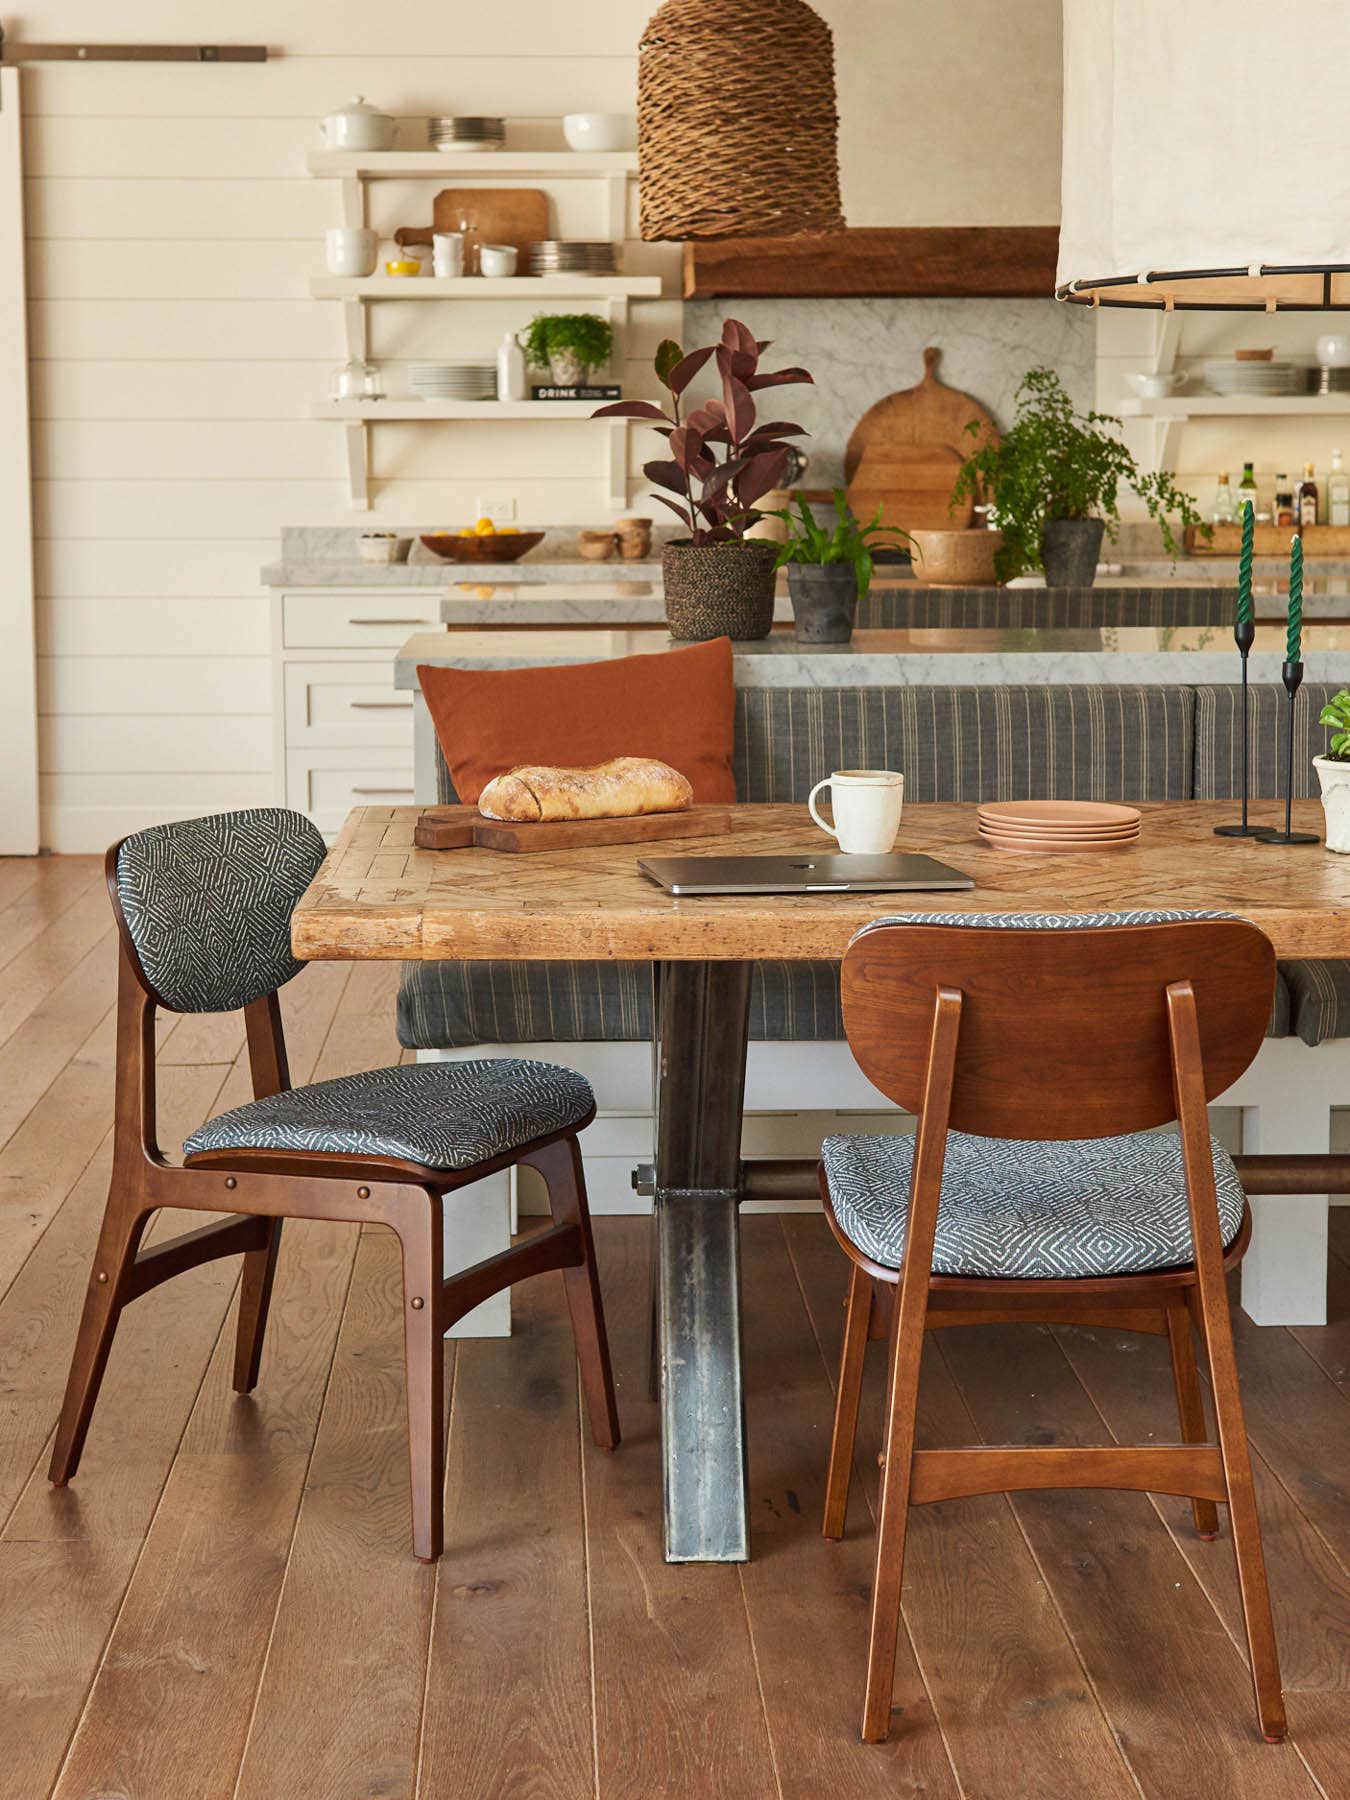 rustic and modern chairs in kitchen